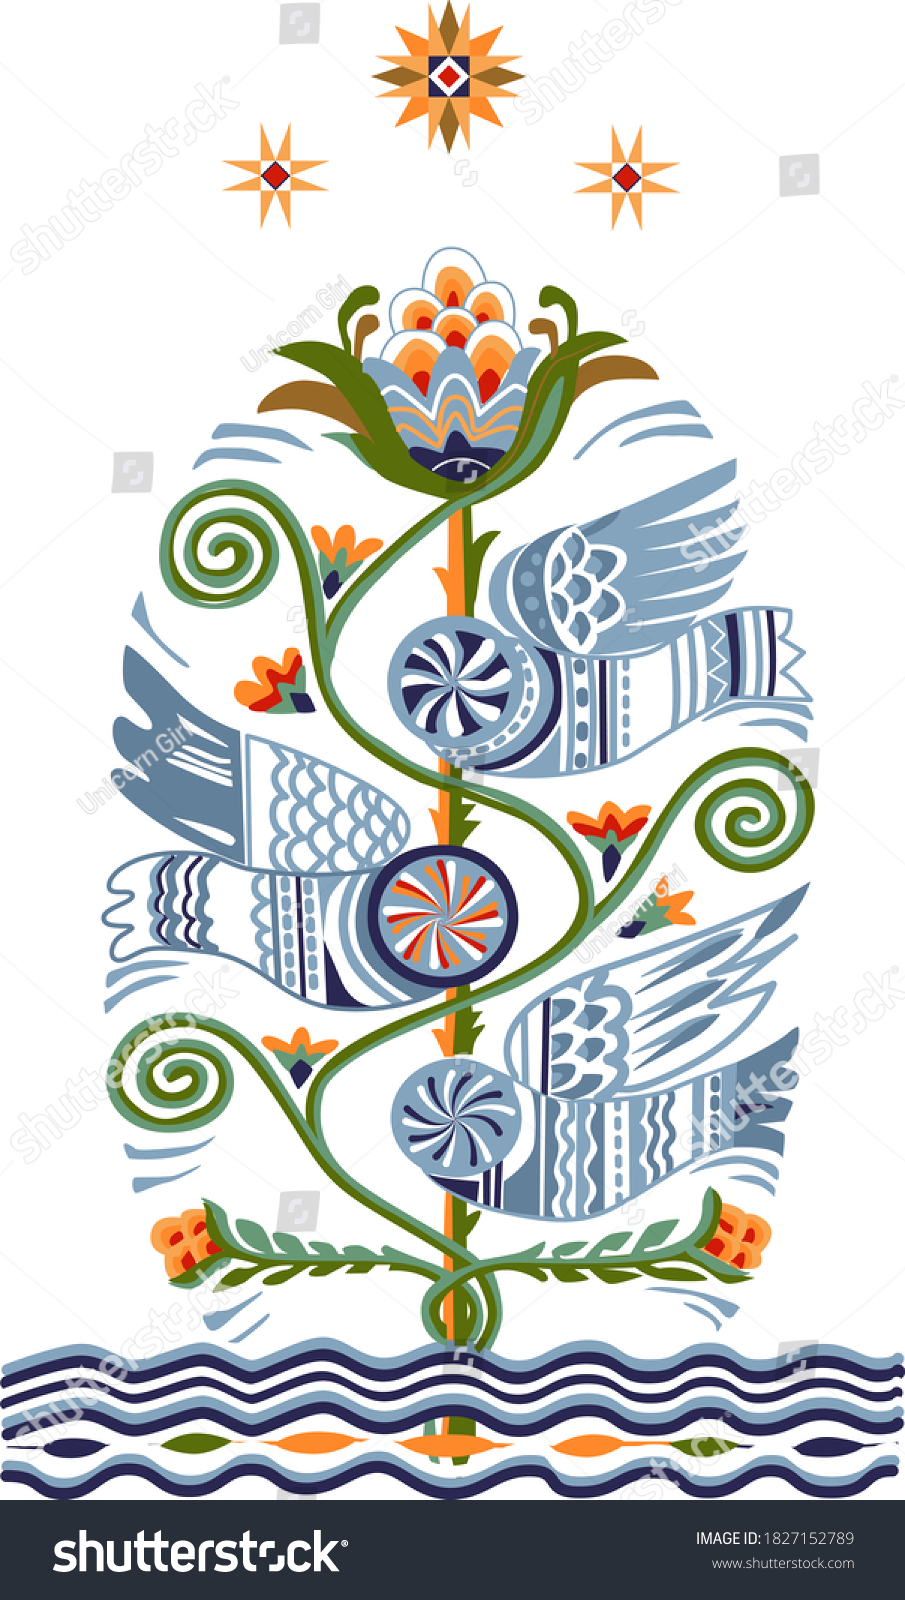 SVG of 
The scheme for embroidery three birds with a flower and leaves twisted in a spiral fly over the stars and the river made in the Ukrainian style svg